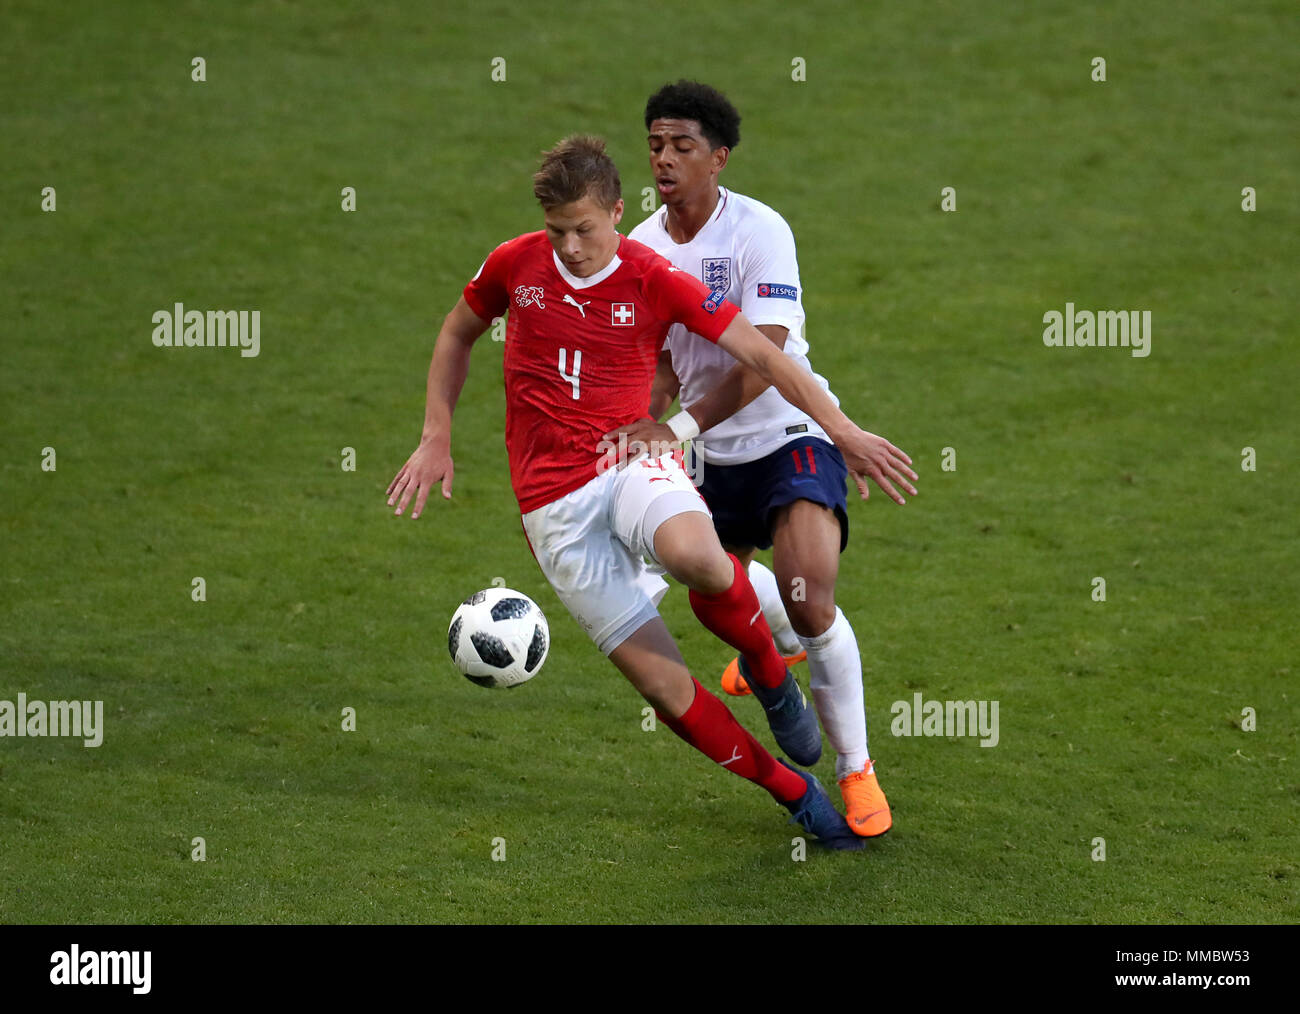 Switzerland's Ilan Sauter (left) and England's Xavier Amaechi battle for the ball during the UEFA European U17 Championship, Group A match at the AESSEAL New York Stadium, Rotherham. Stock Photo